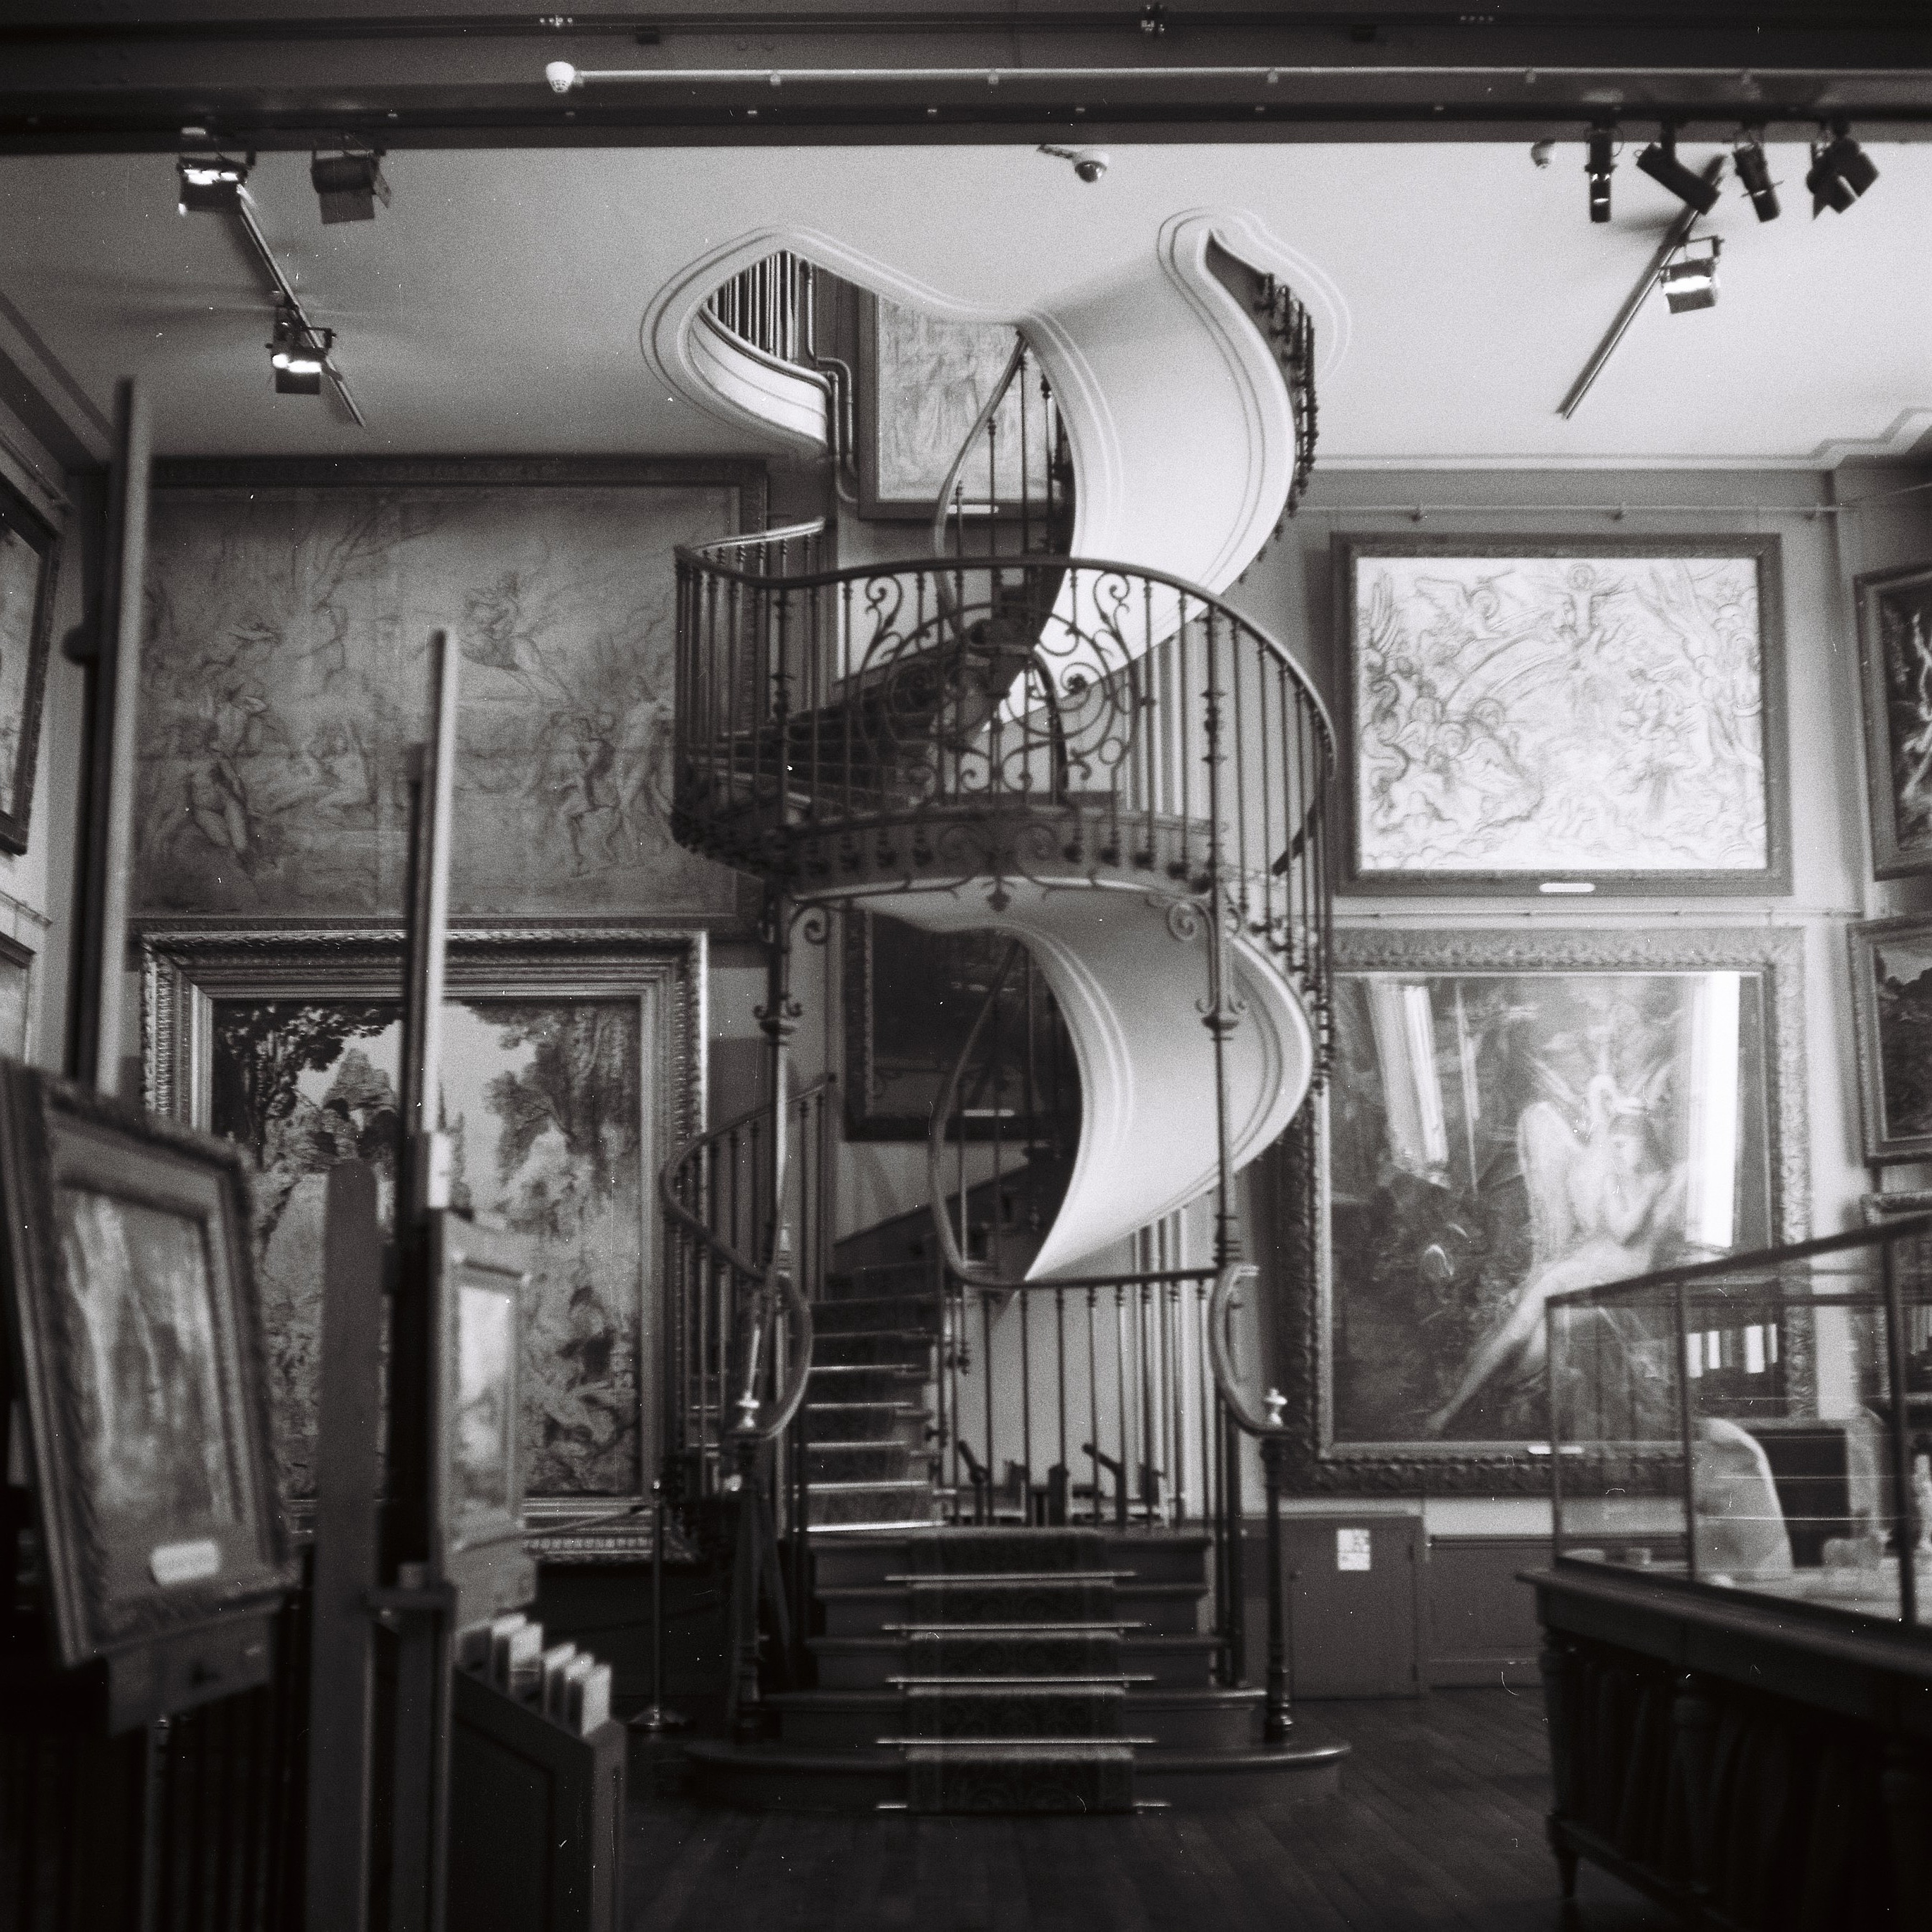 the famous spiral staircase at musée gustave moreau in the artist's atelier